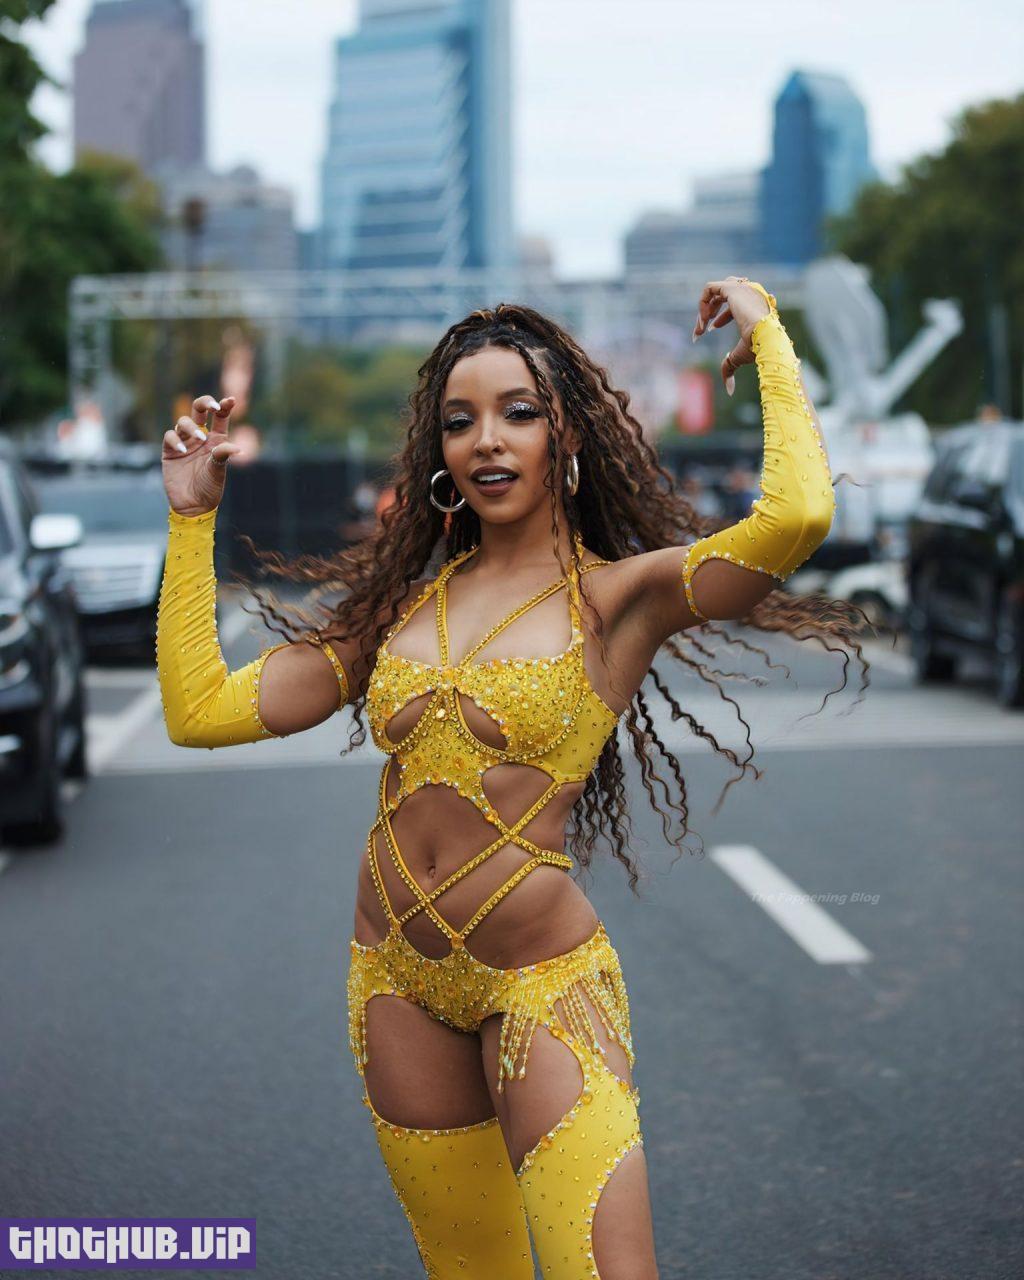 Tinashe Hot Body in SKimpy Outfit 1 thefappeningblog.com